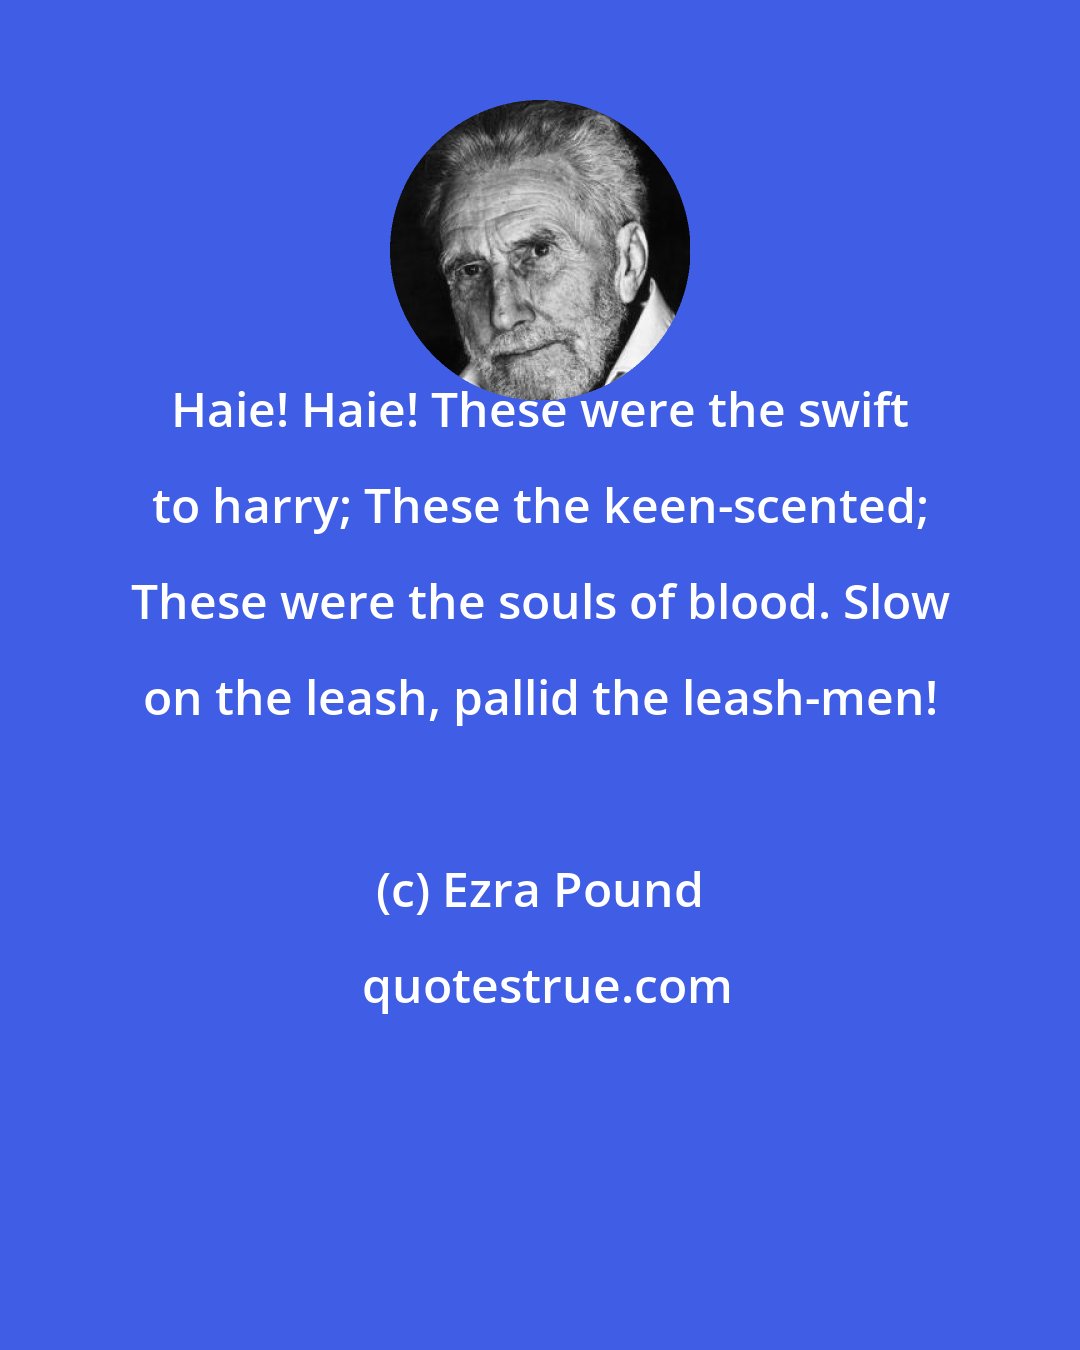 Ezra Pound: Haie! Haie! These were the swift to harry; These the keen-scented; These were the souls of blood. Slow on the leash, pallid the leash-men!